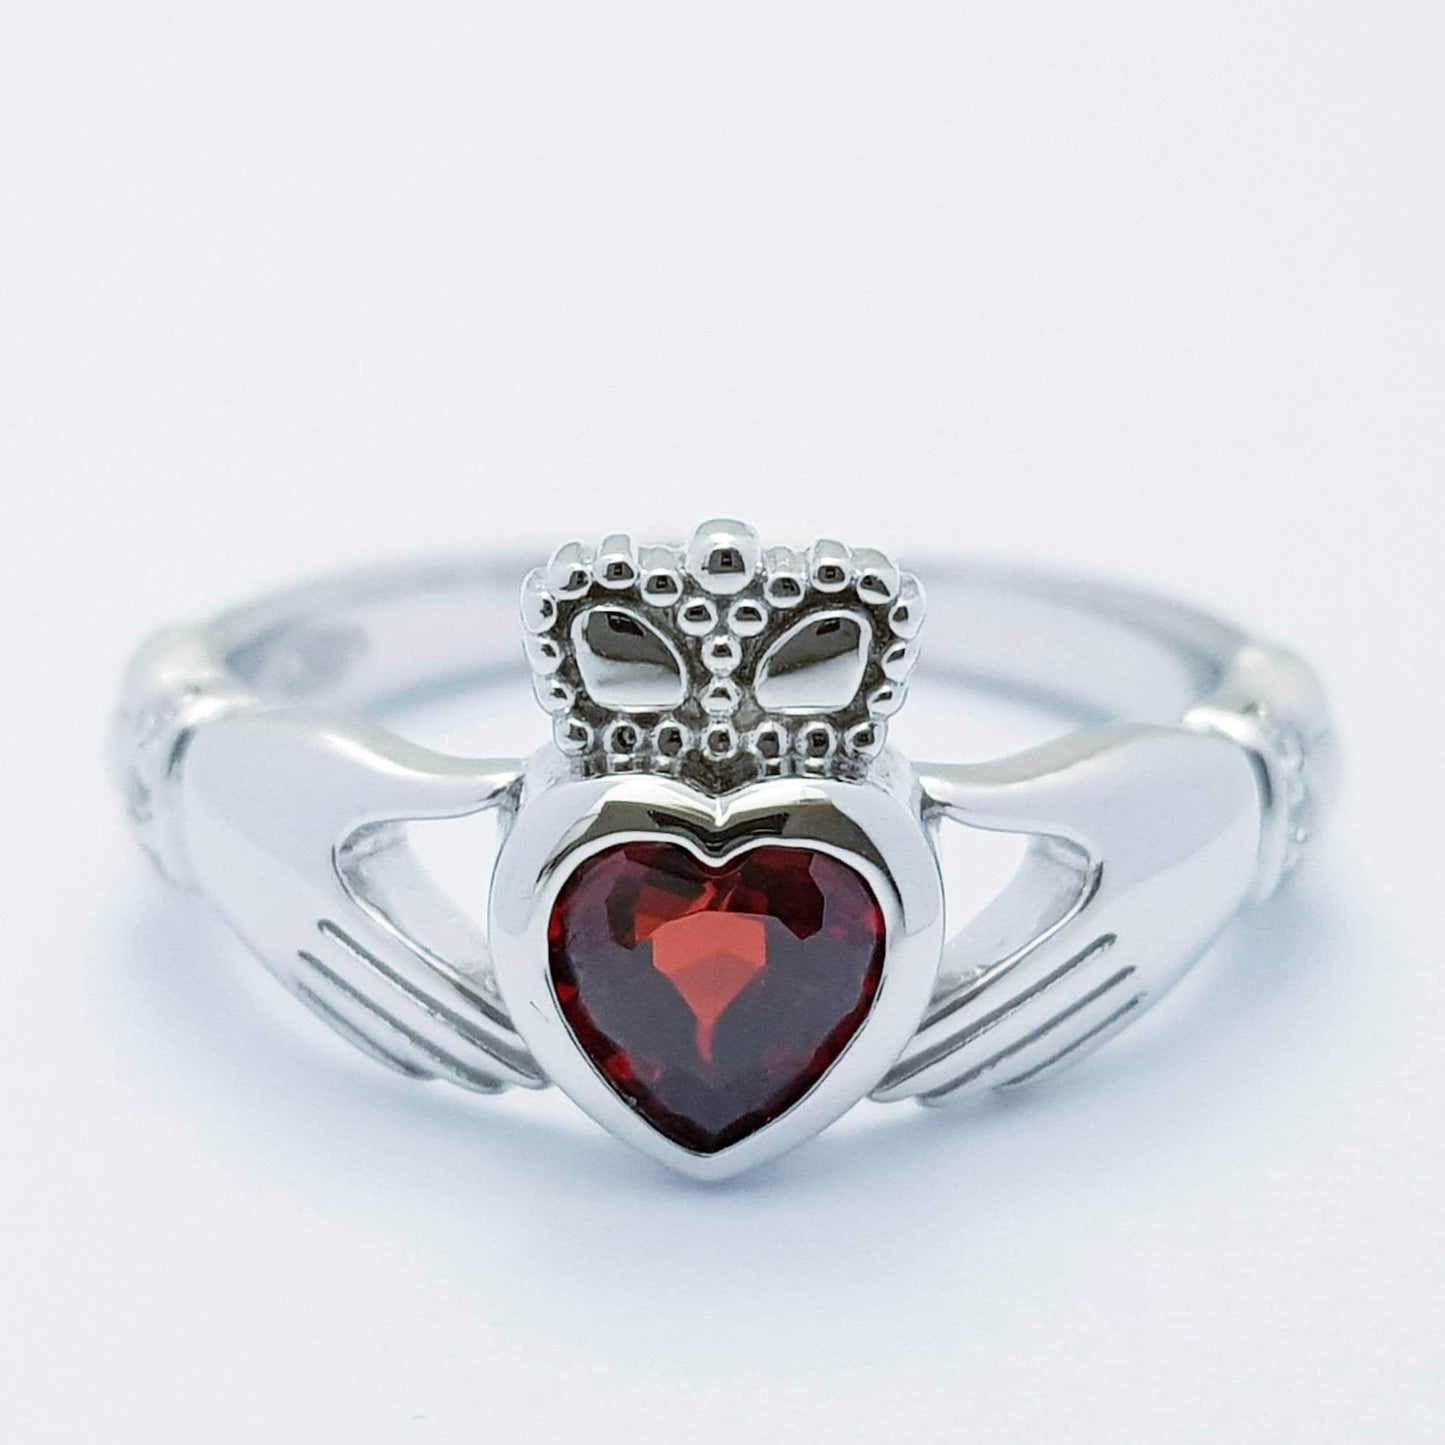 Sterling Silver Claddagh ring set with red garnet heart shaped stone, Irish claddagh rings